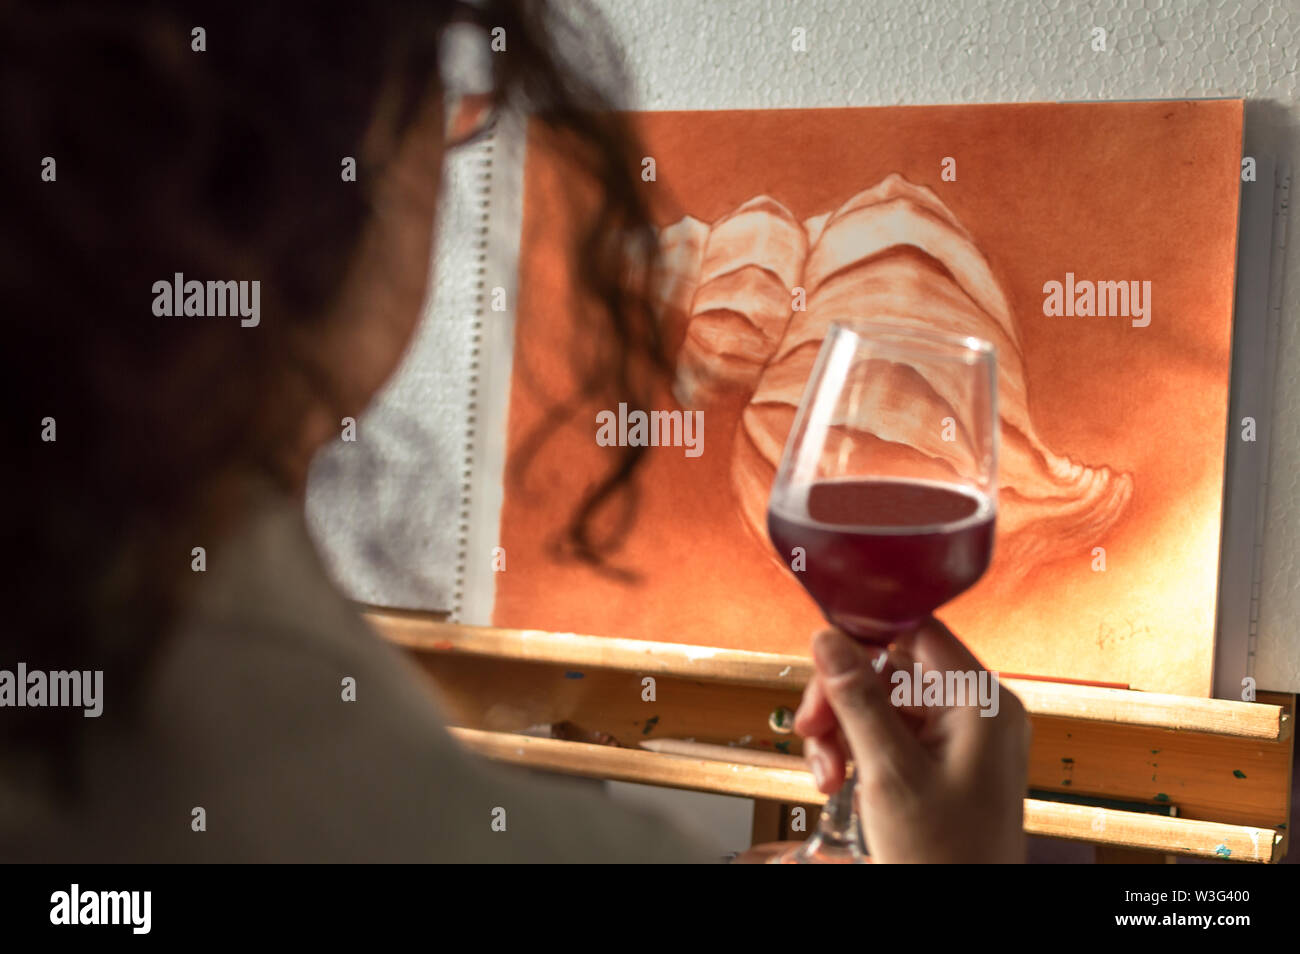 Woman drinking a glass of wine to celebrate that she has finished her painting. Artist contemplating his finished work. Stock Photo